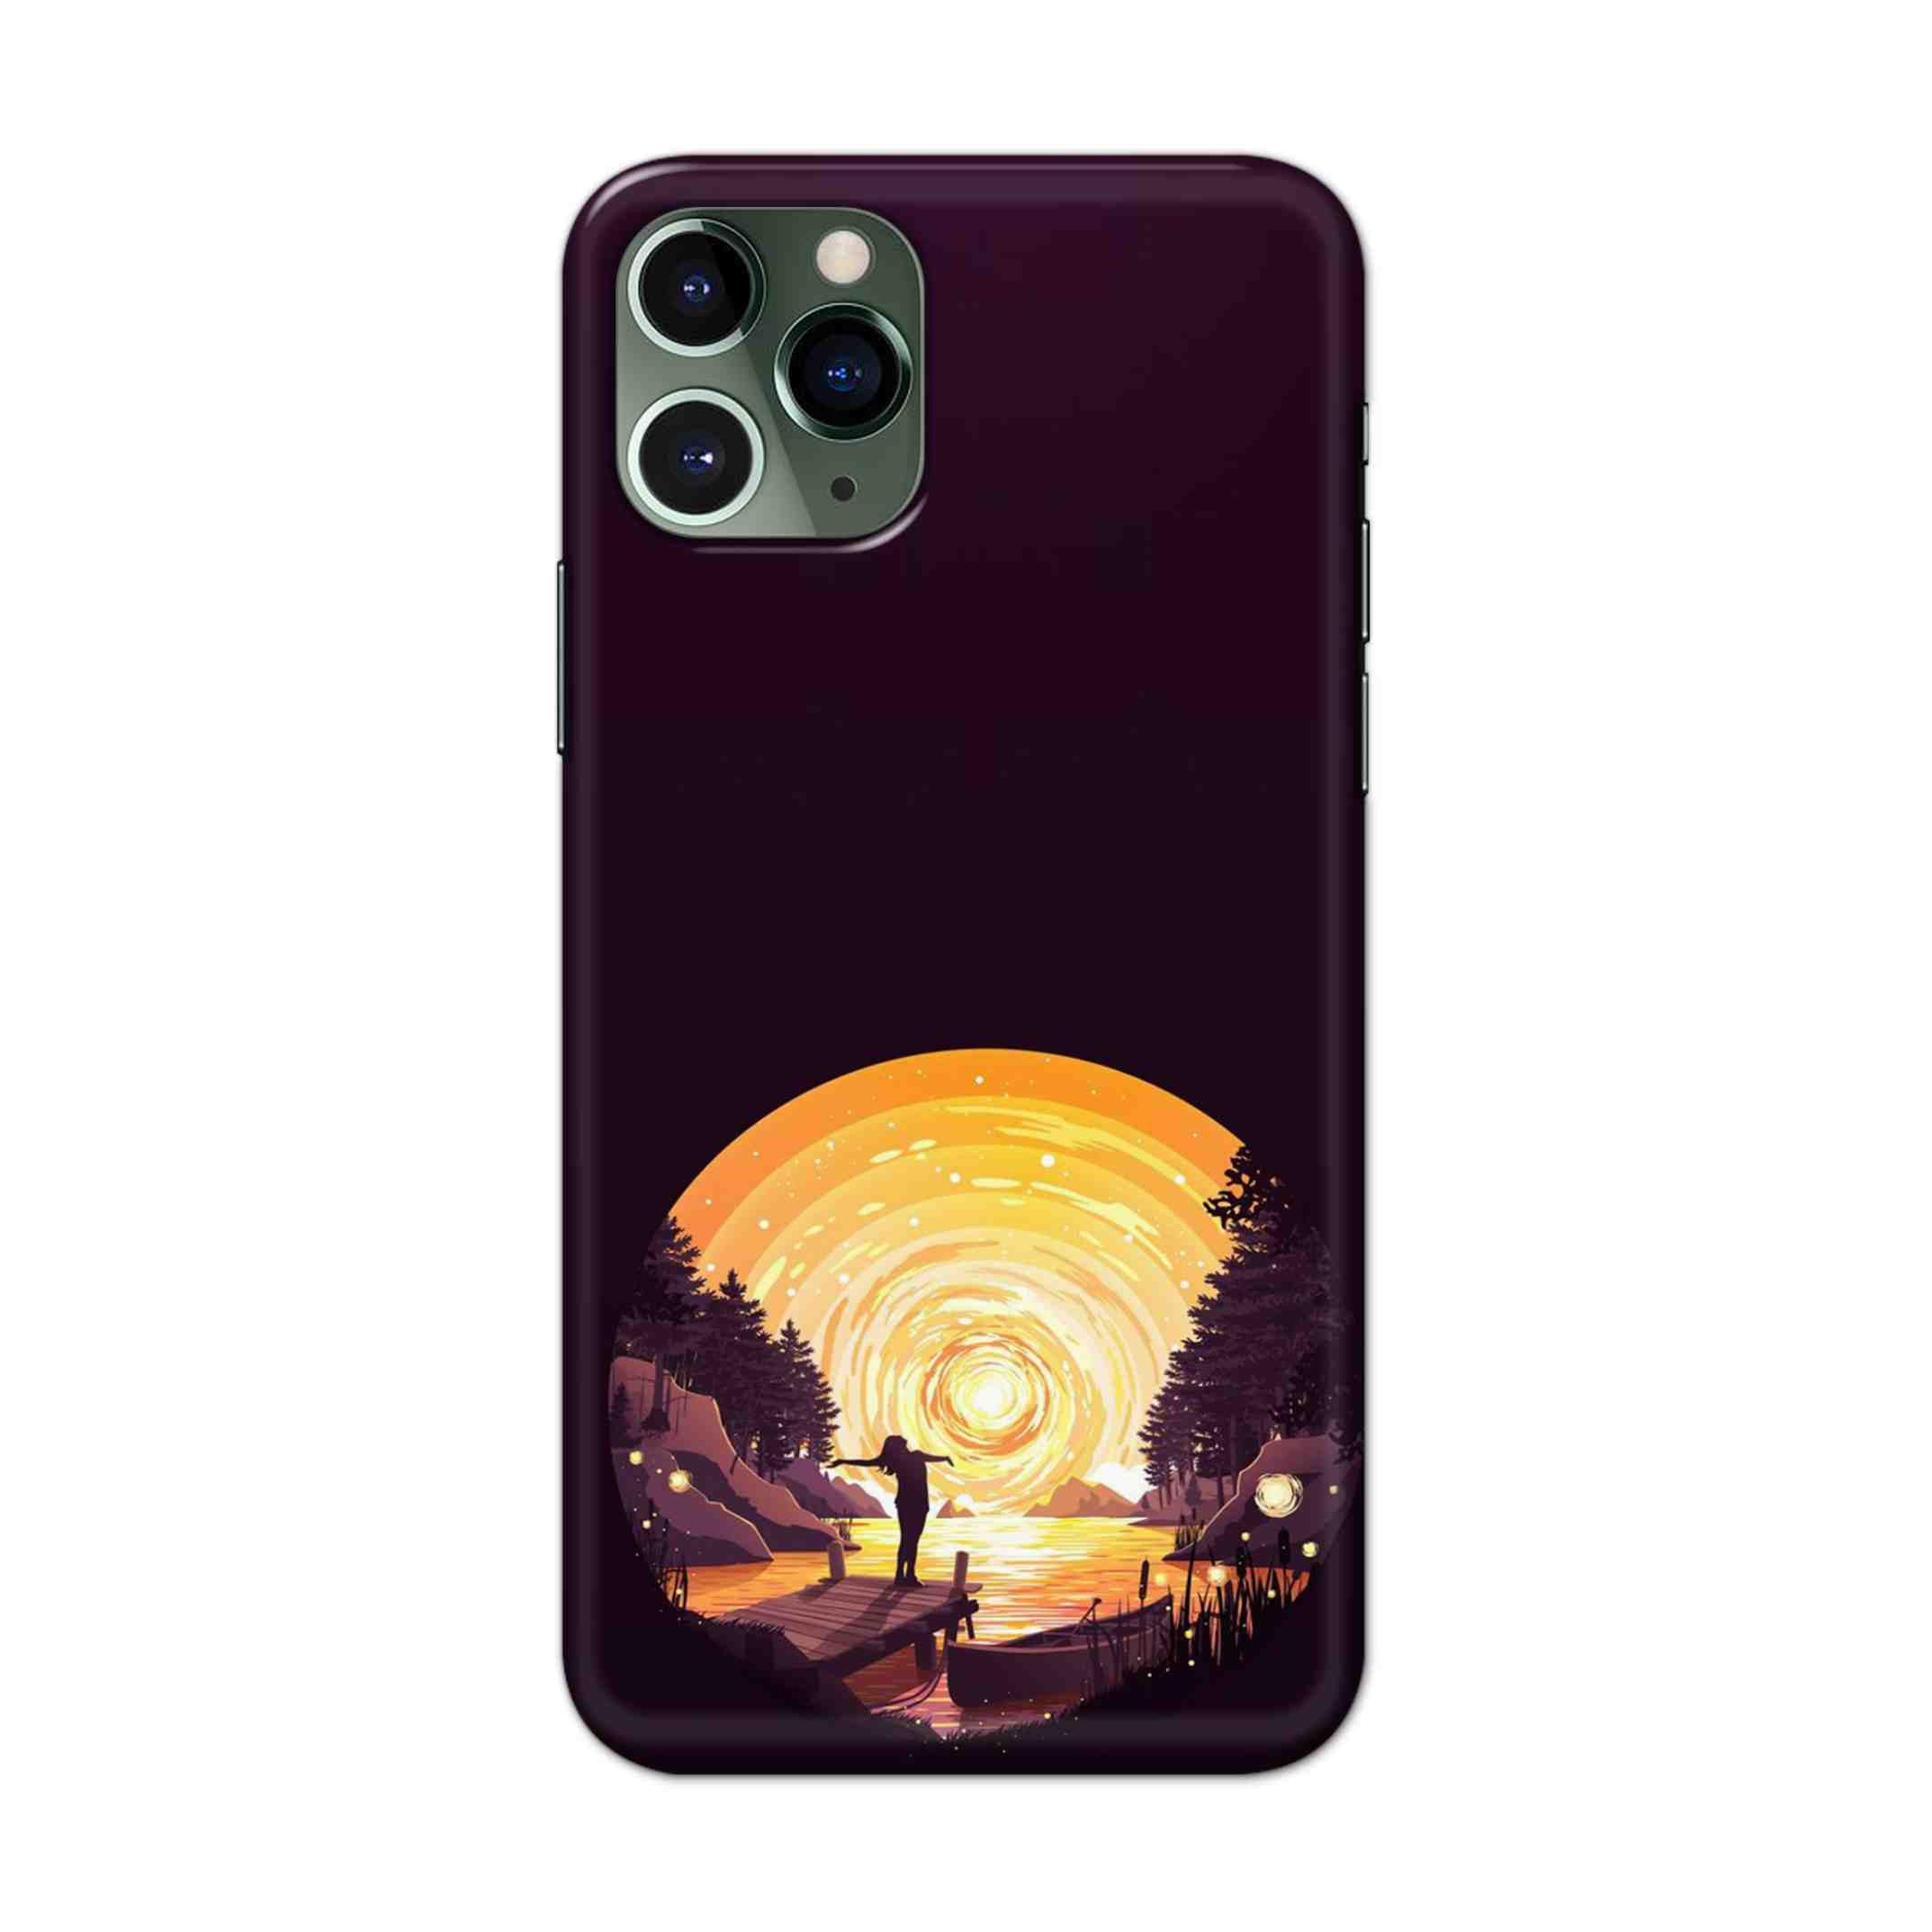 Buy Night Sunrise Hard Back Mobile Phone Case/Cover For iPhone 11 Pro Online